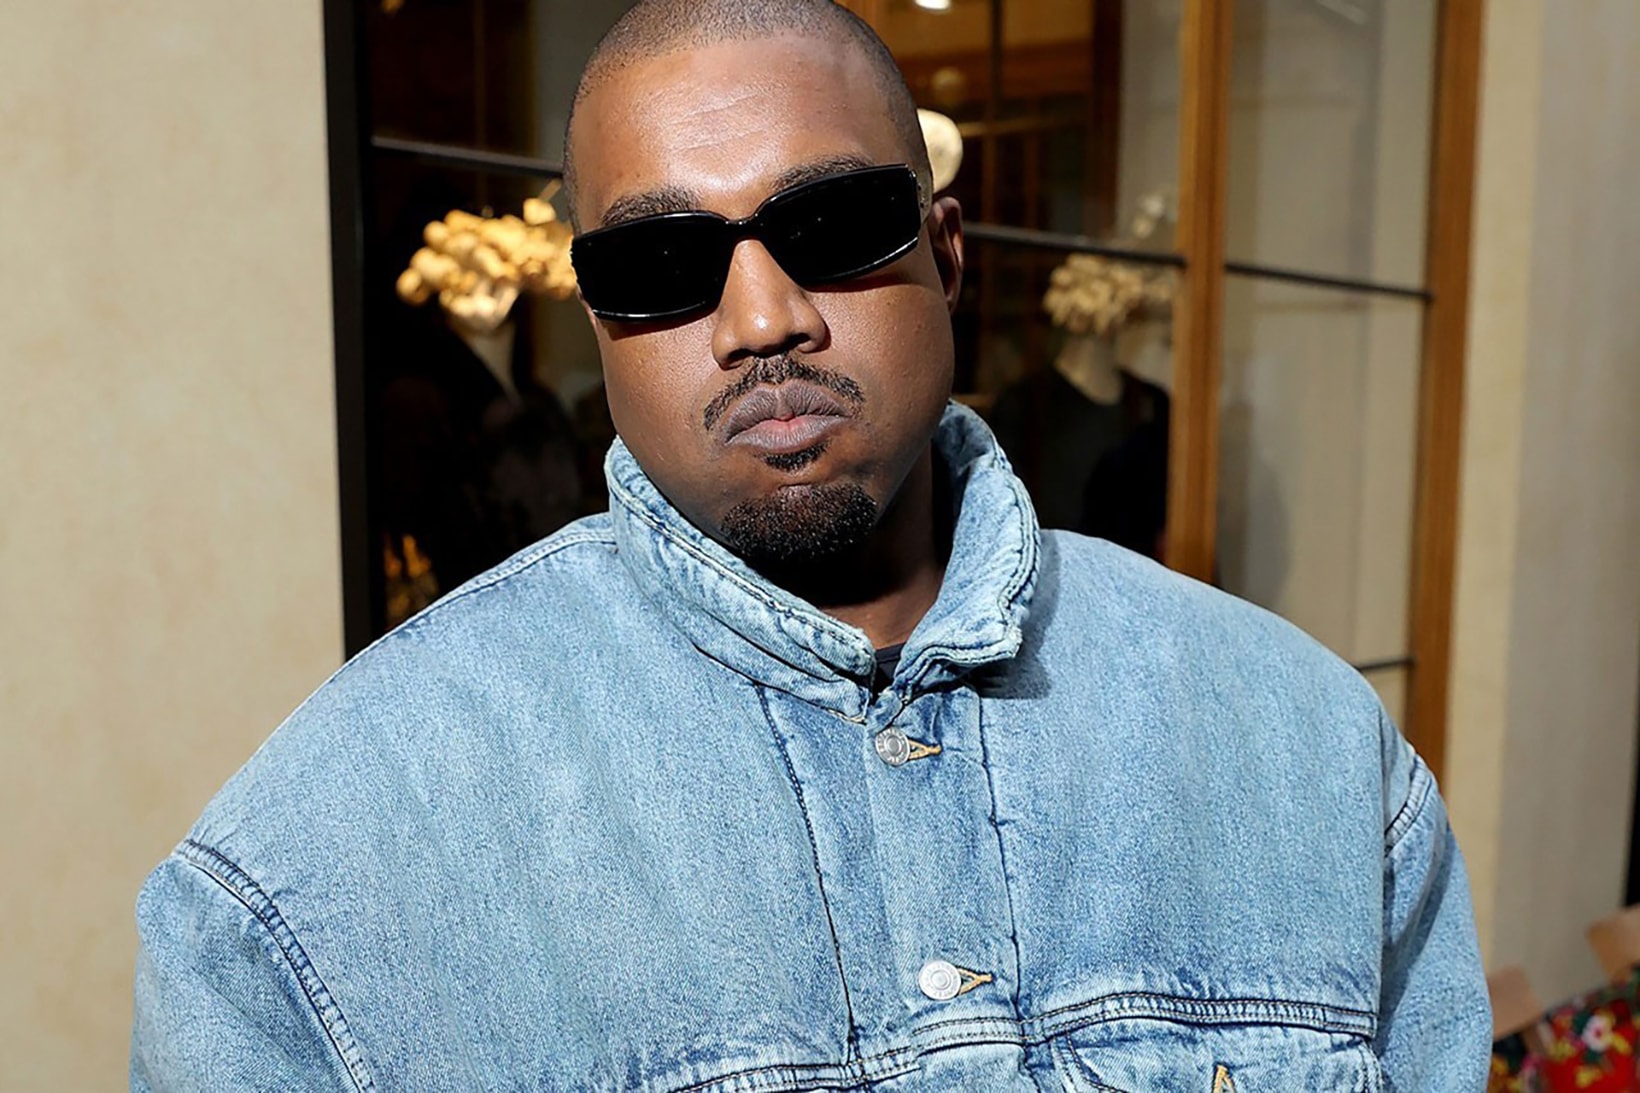 Kanye West Barred From Performing at Grammys, His Rep Confirms